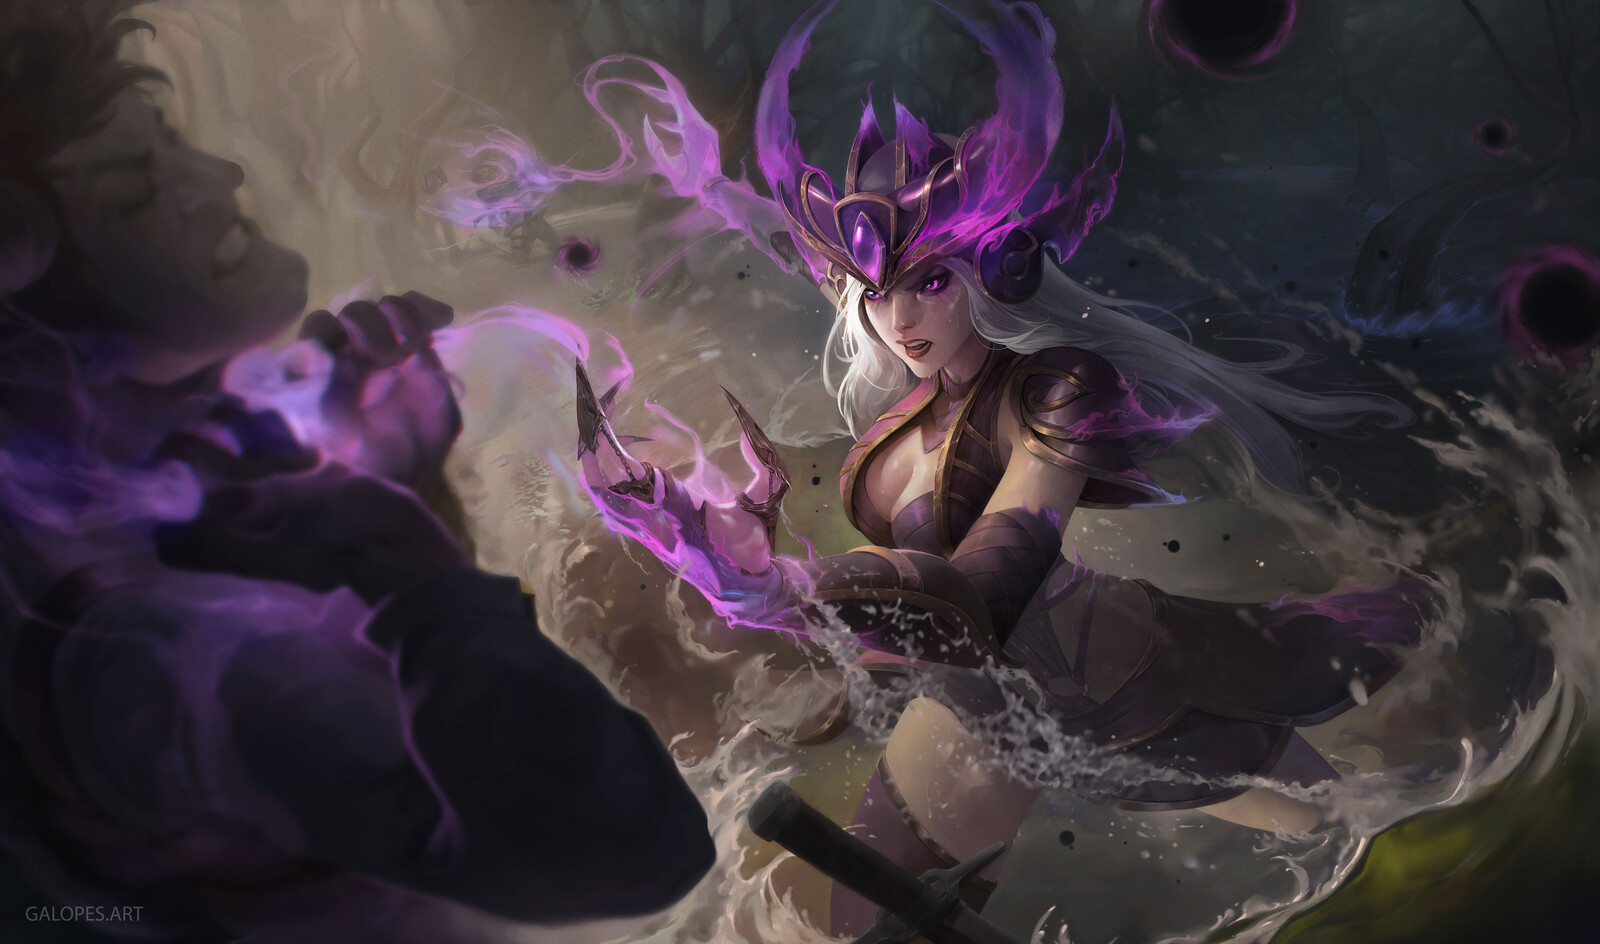 Syndra - The unstoppable Queen, Fanart